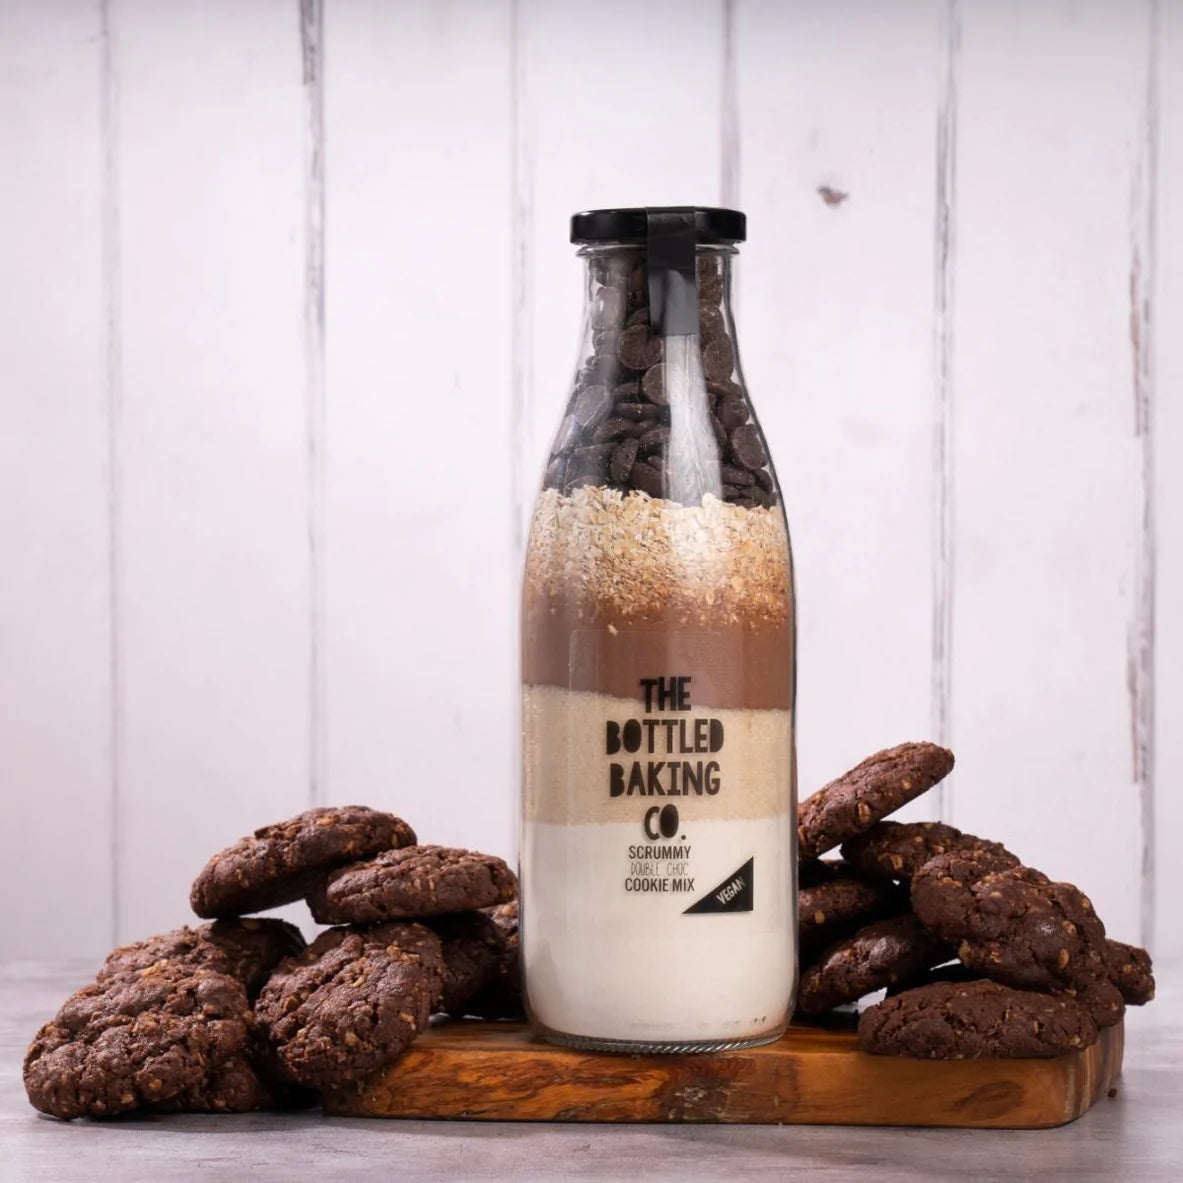 The Bottled Baking Co. Vegan Double Choc Chip Cookie Mix